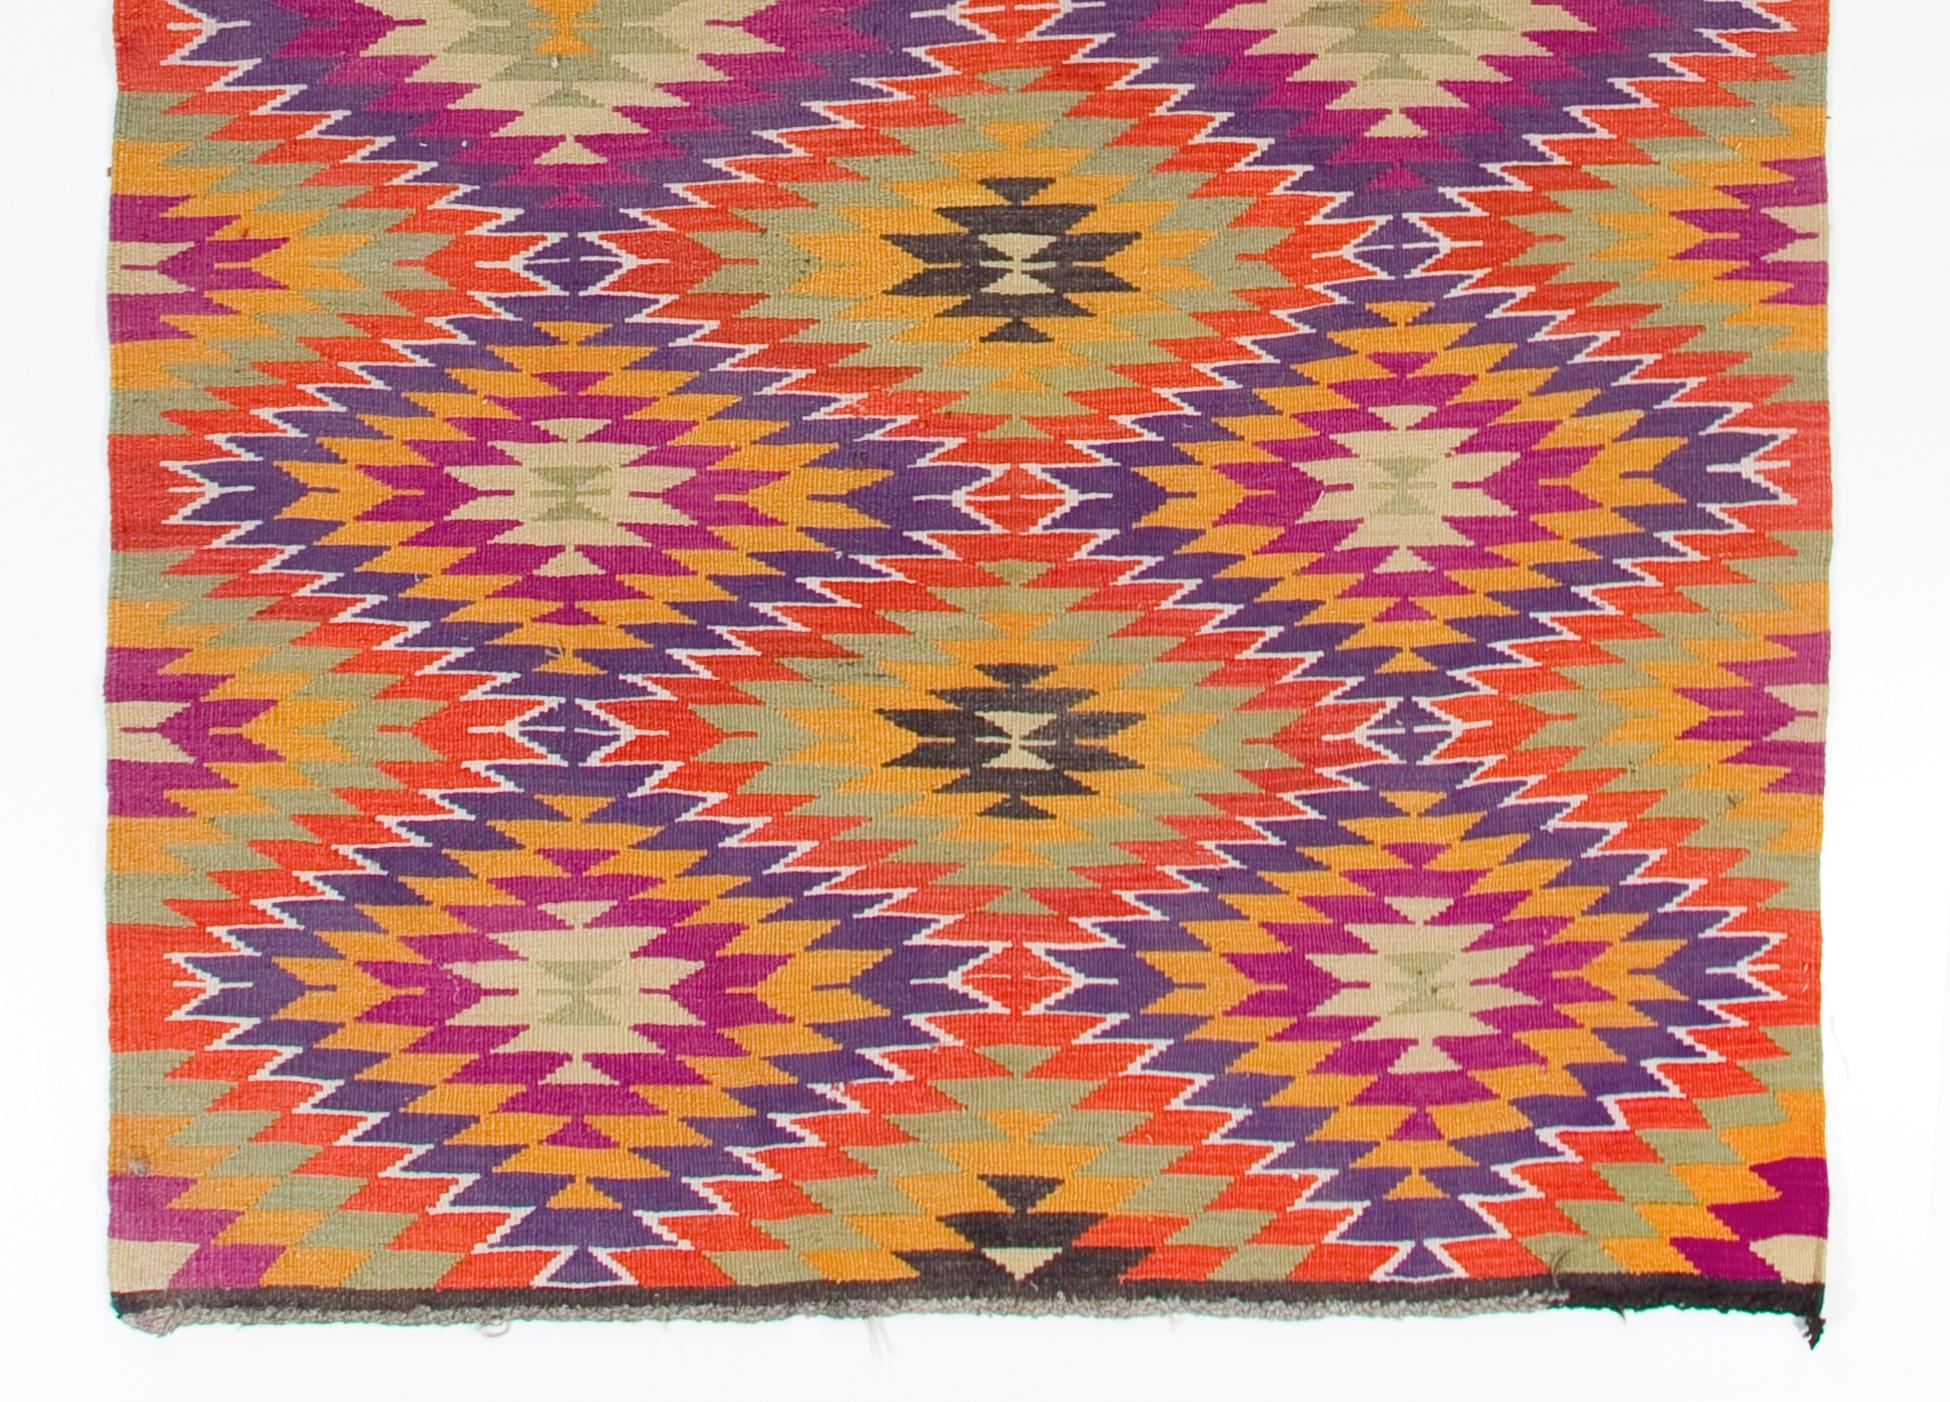 Hand-Woven 5.4x12 Ft Dazzling Handmade Kilim, Unique Flat-Weave Rug, Wool Floor Covering For Sale